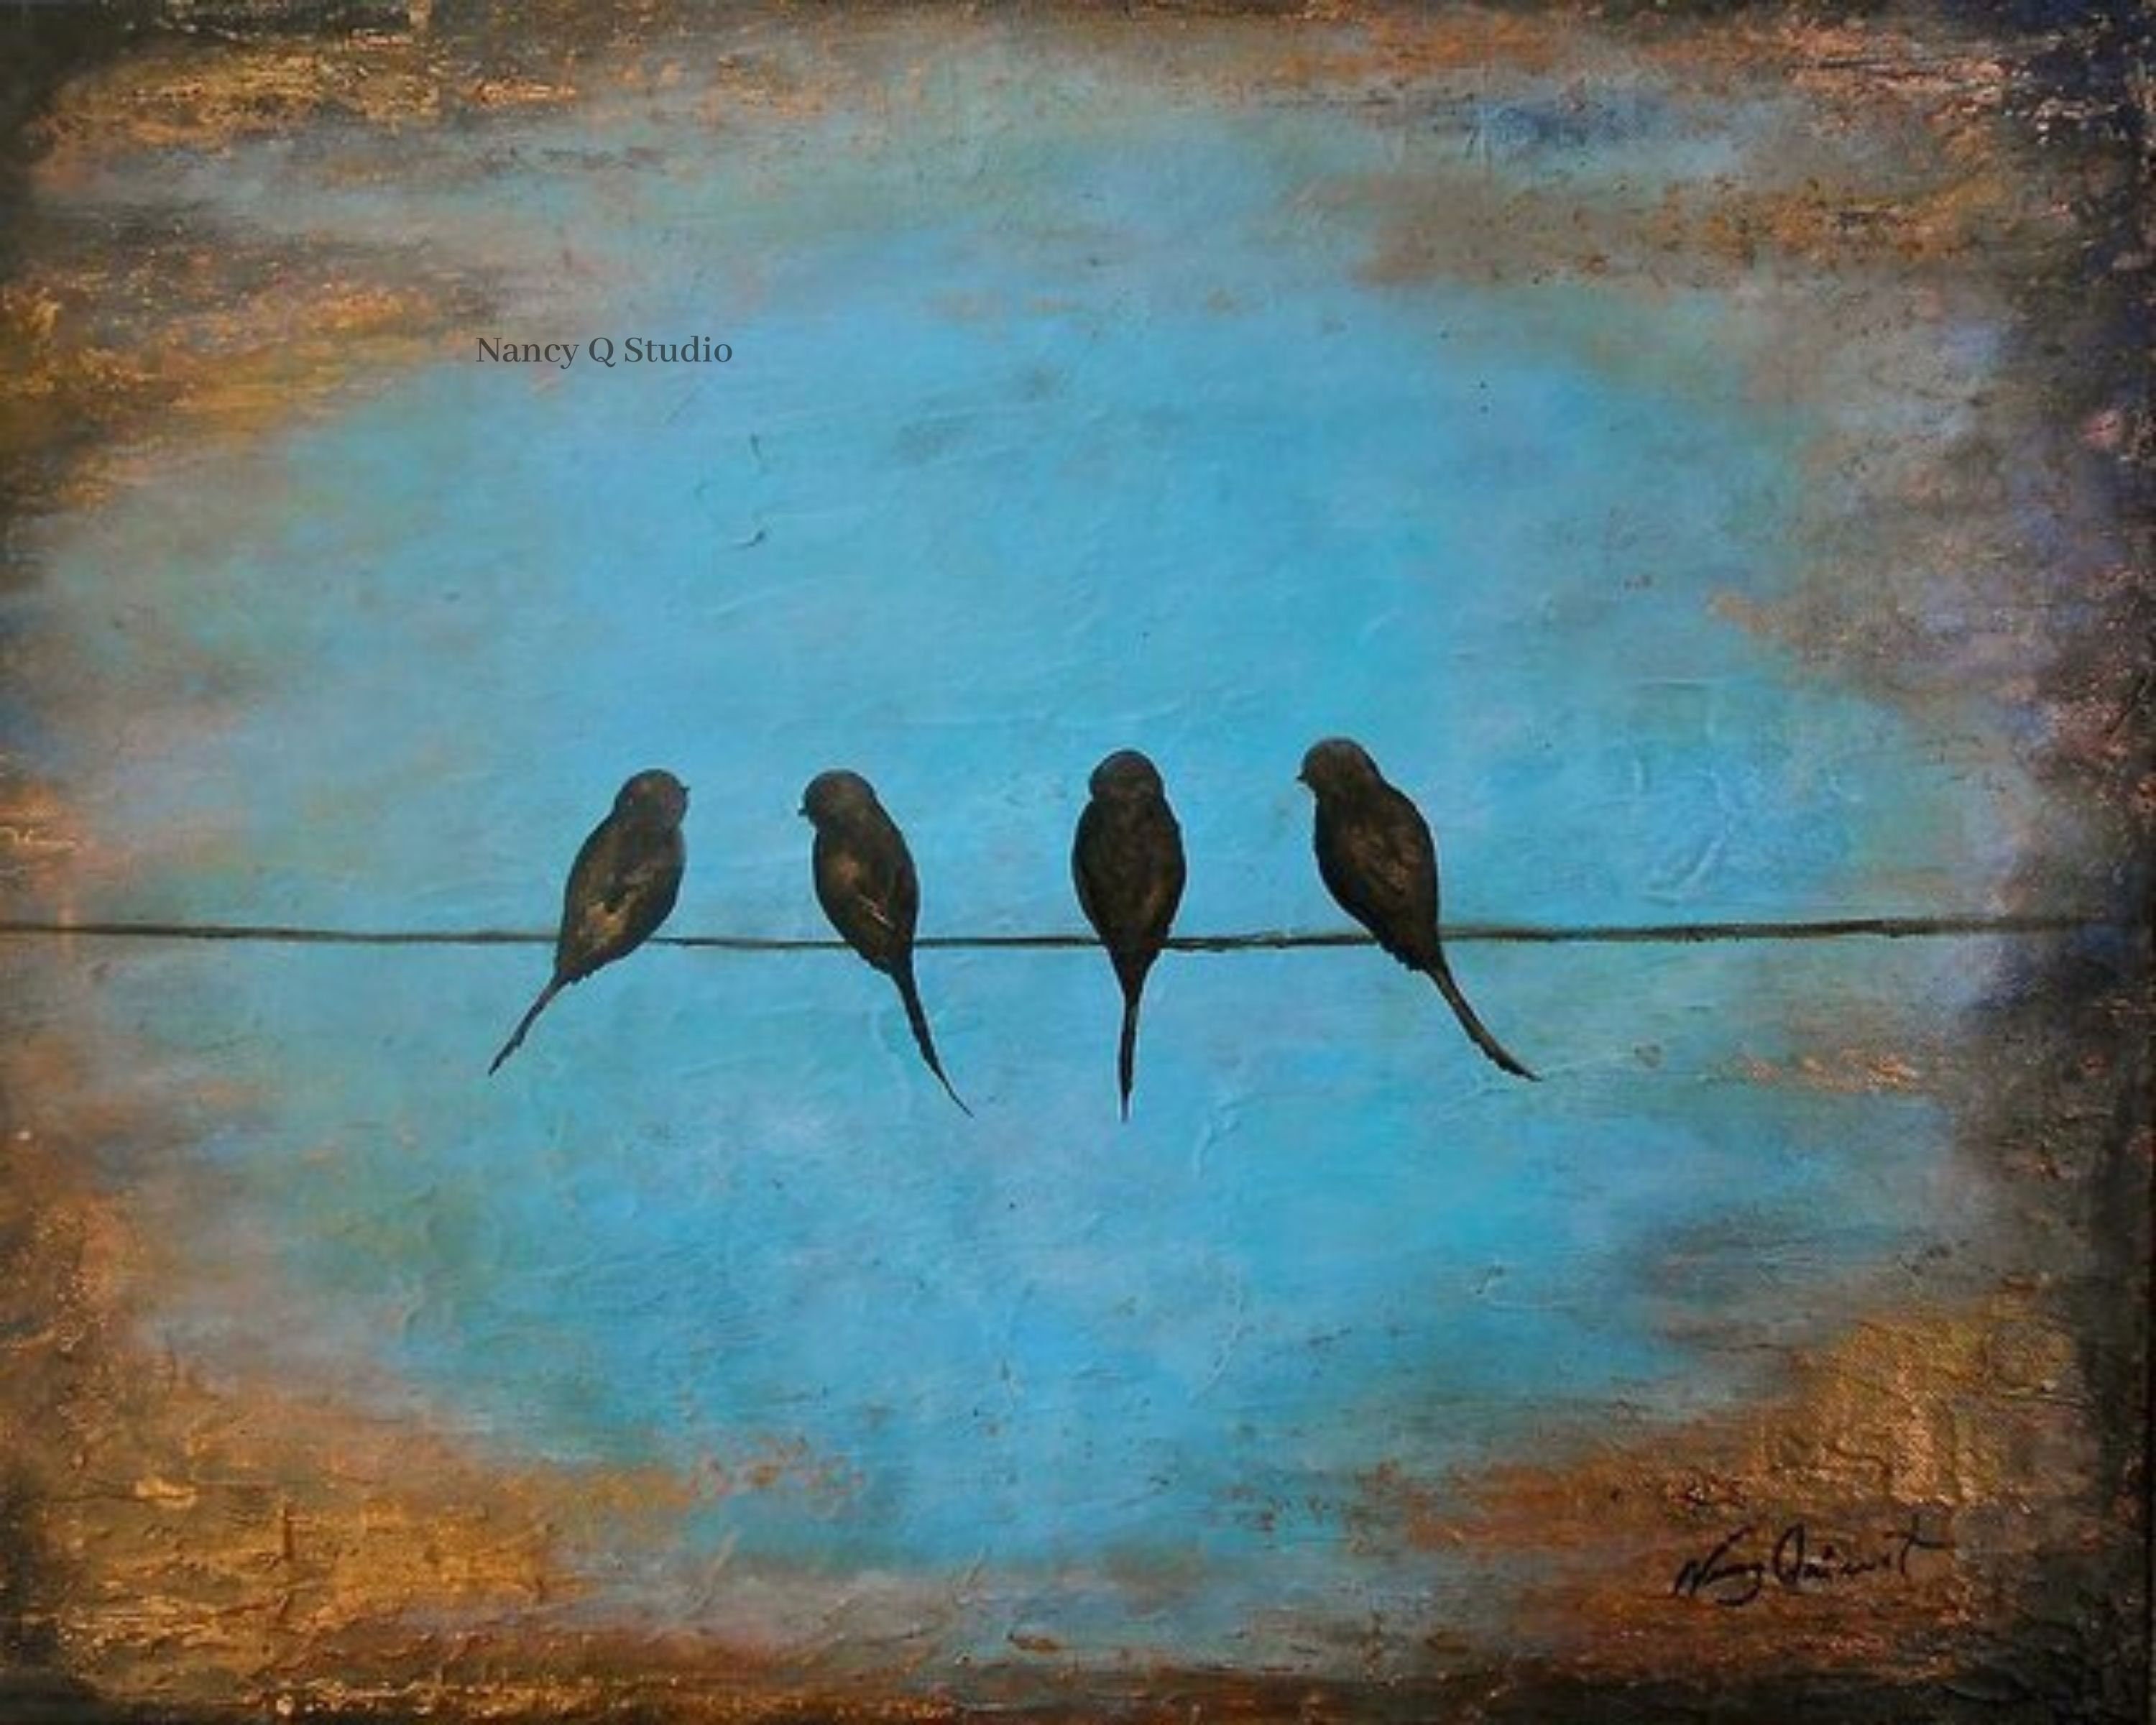 Birds on a Wire Wall Art - Etsy